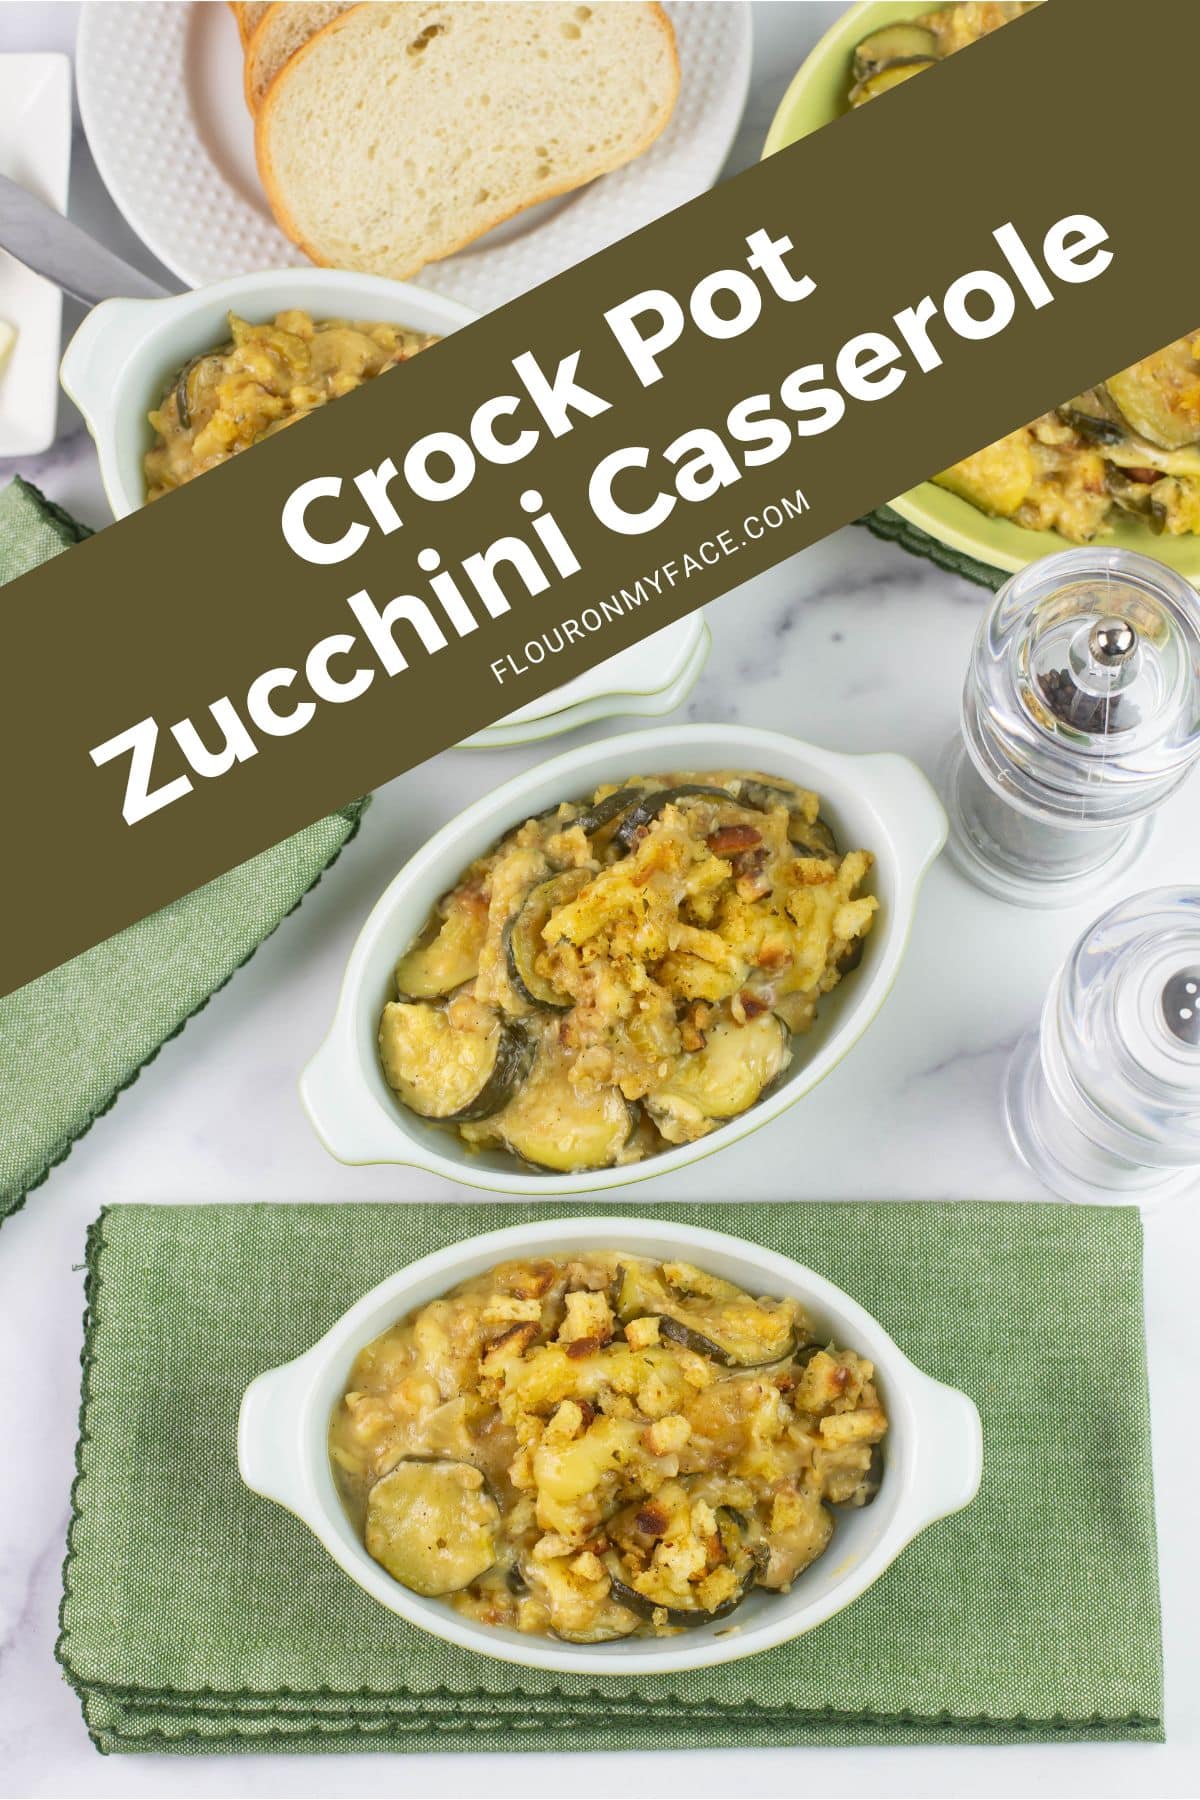 Verticle featured image of Zucchini Casserole served in an oval serving bowl.